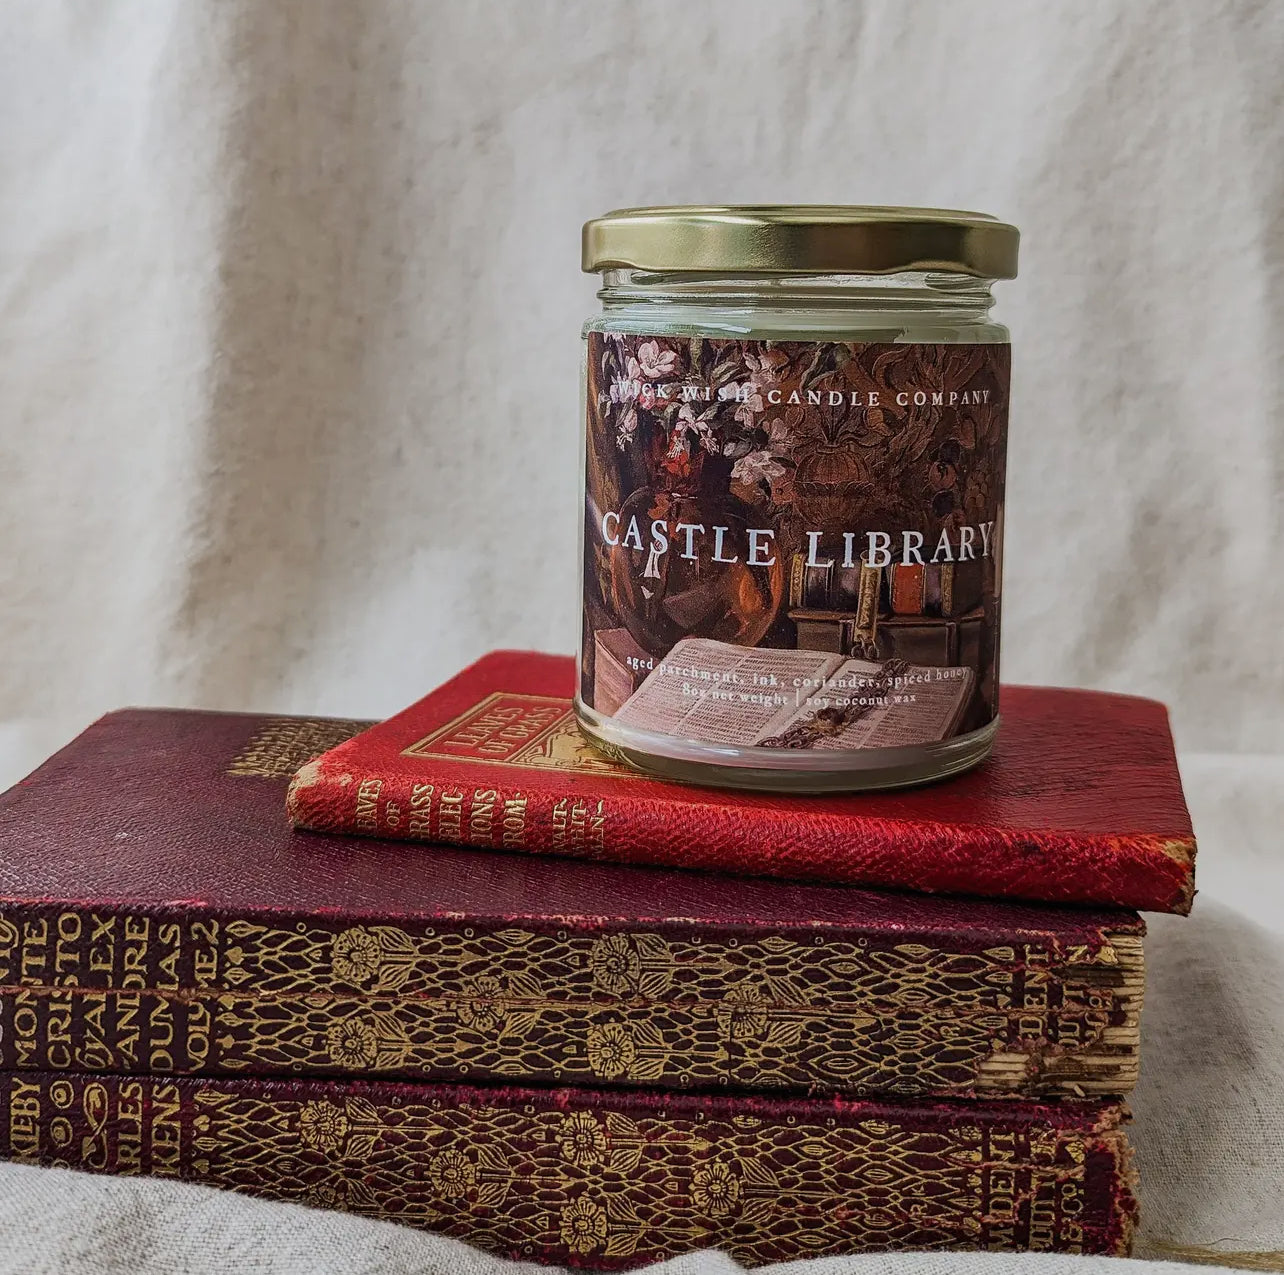 Castle Library Candle